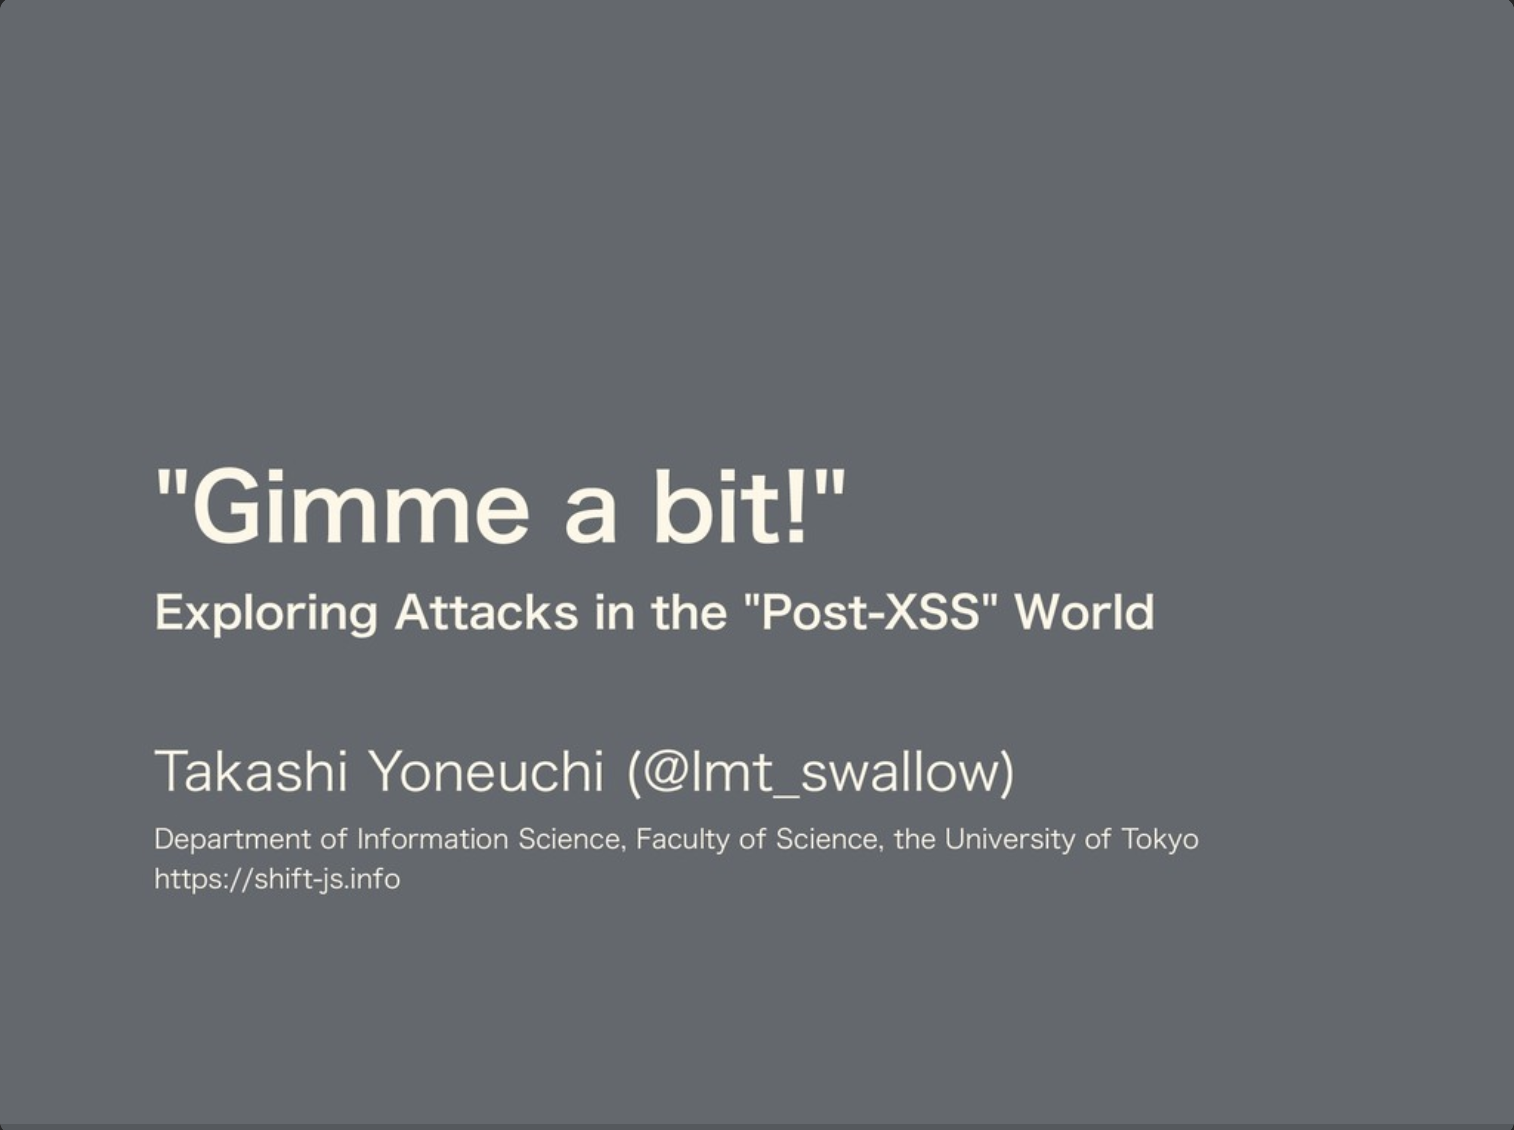 Gimme a bit! - Exploring Attacks in the Post-XSS World